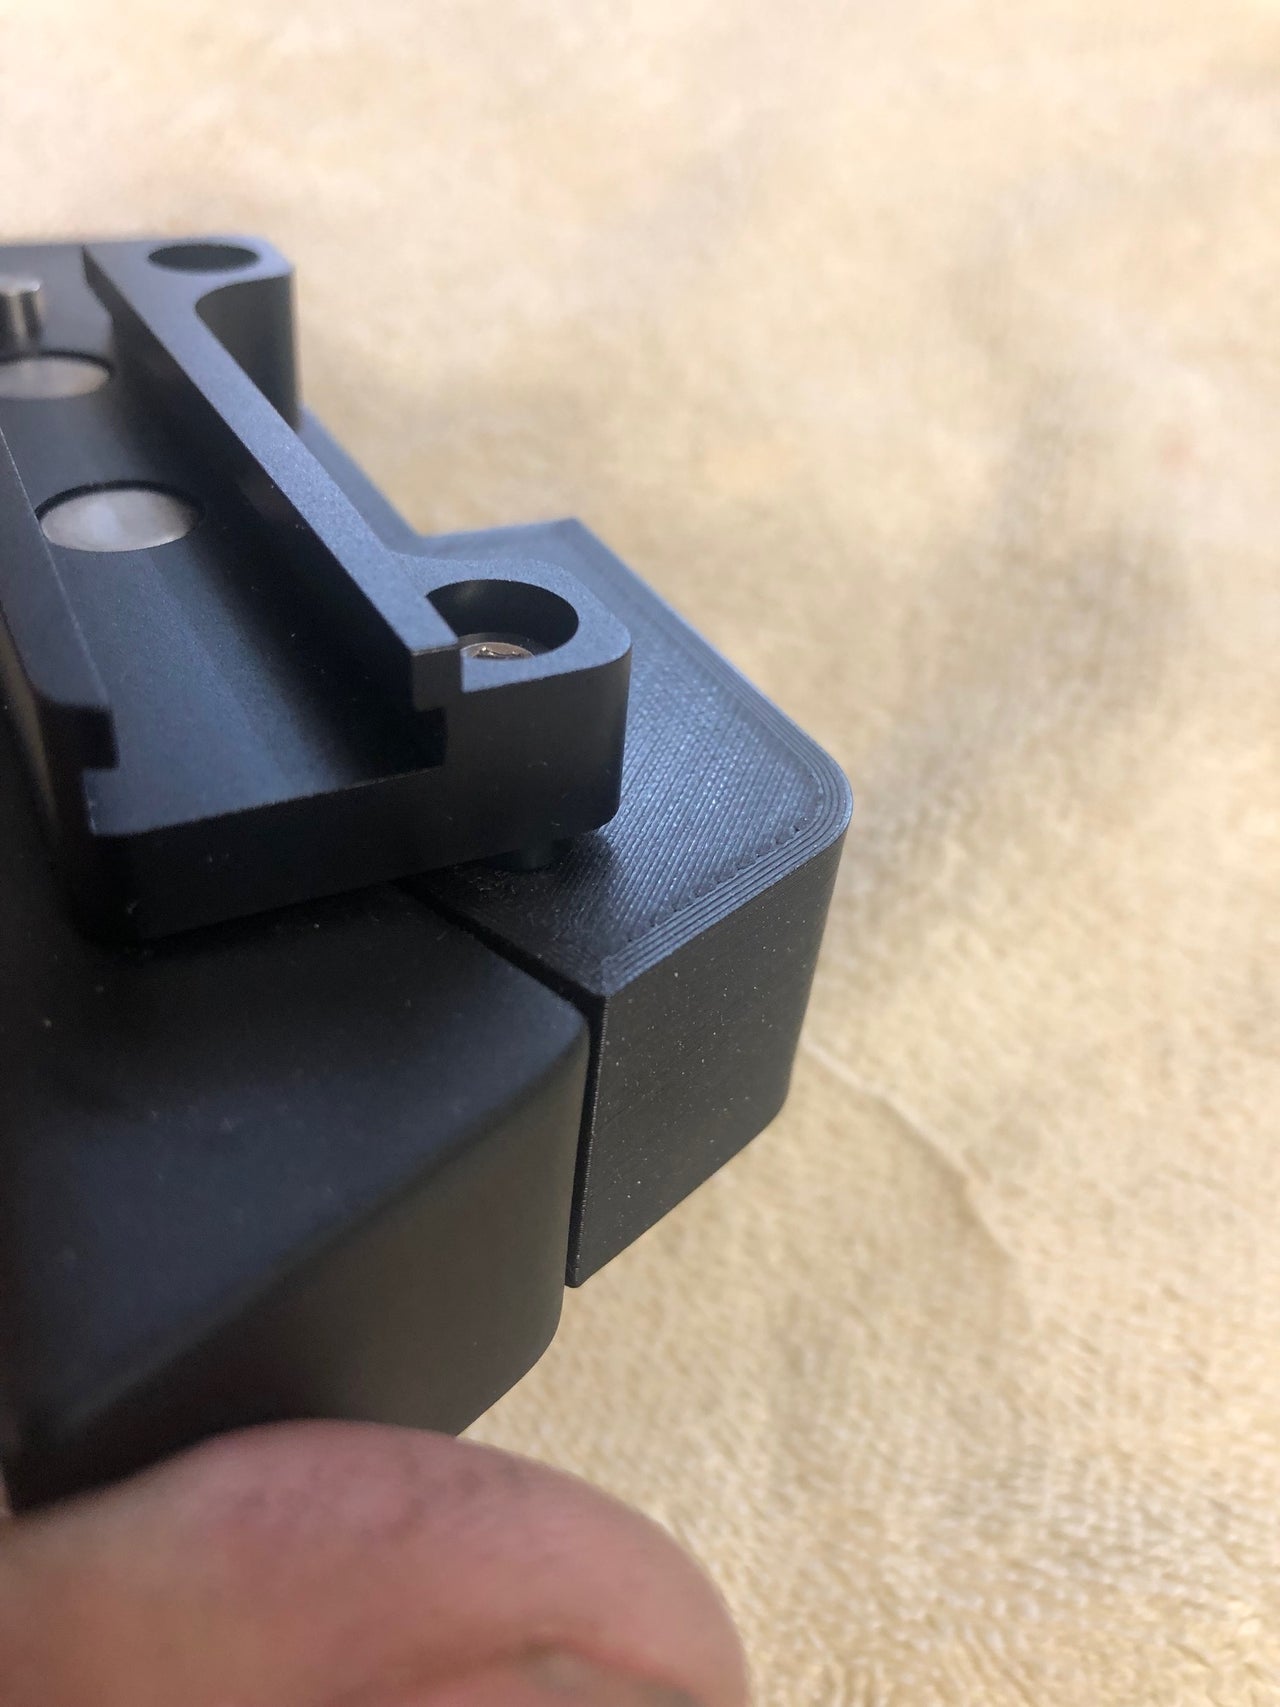 LCS Butpad Adapter for Saber Tactical Monopod